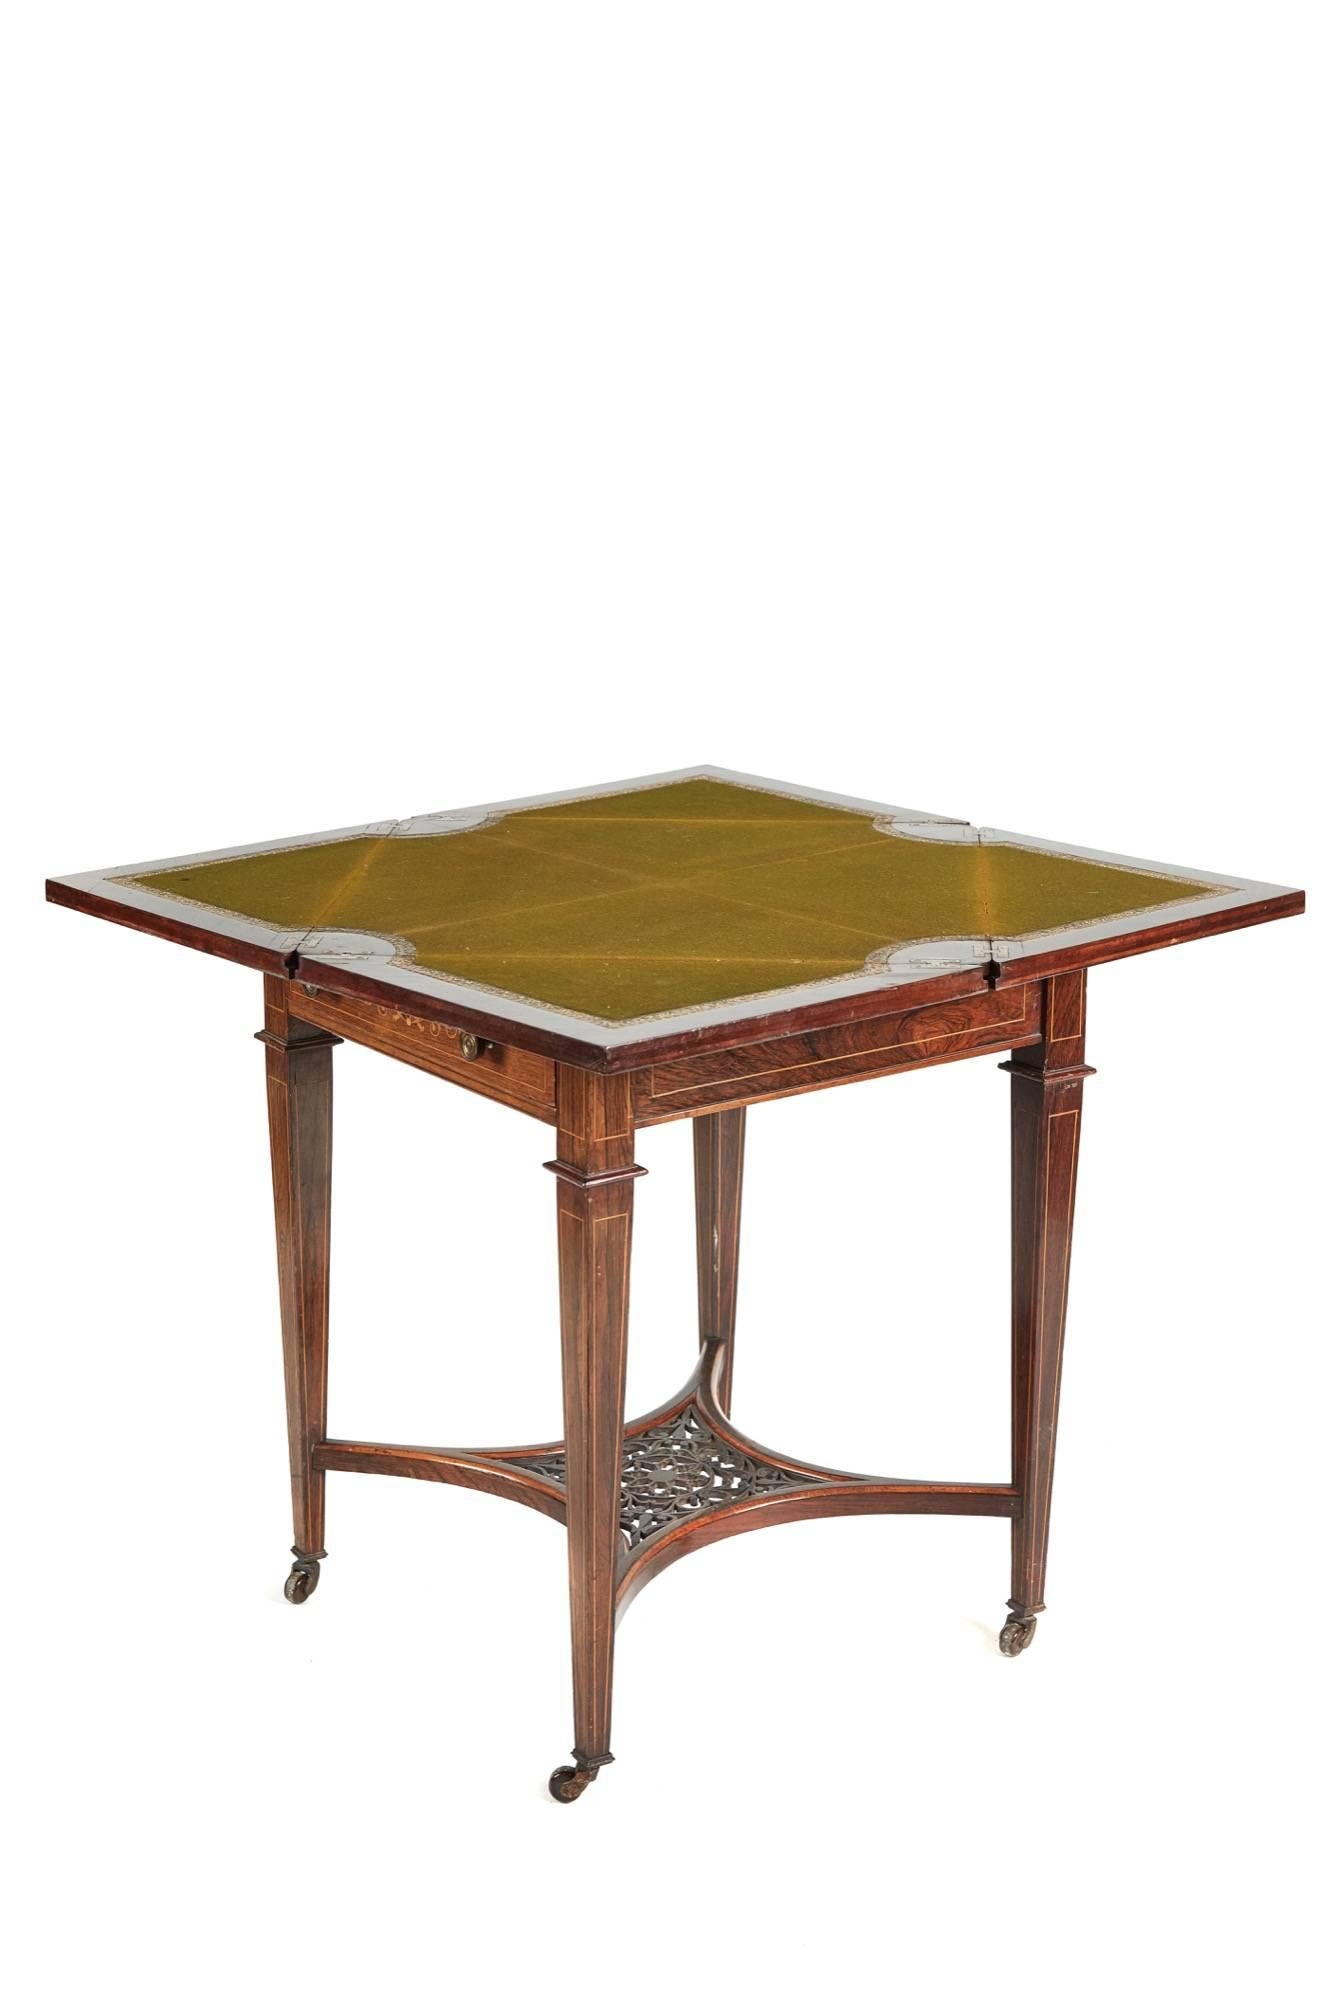 Victorian Rosewood and Marquetry Inlaid Envelope Card Table